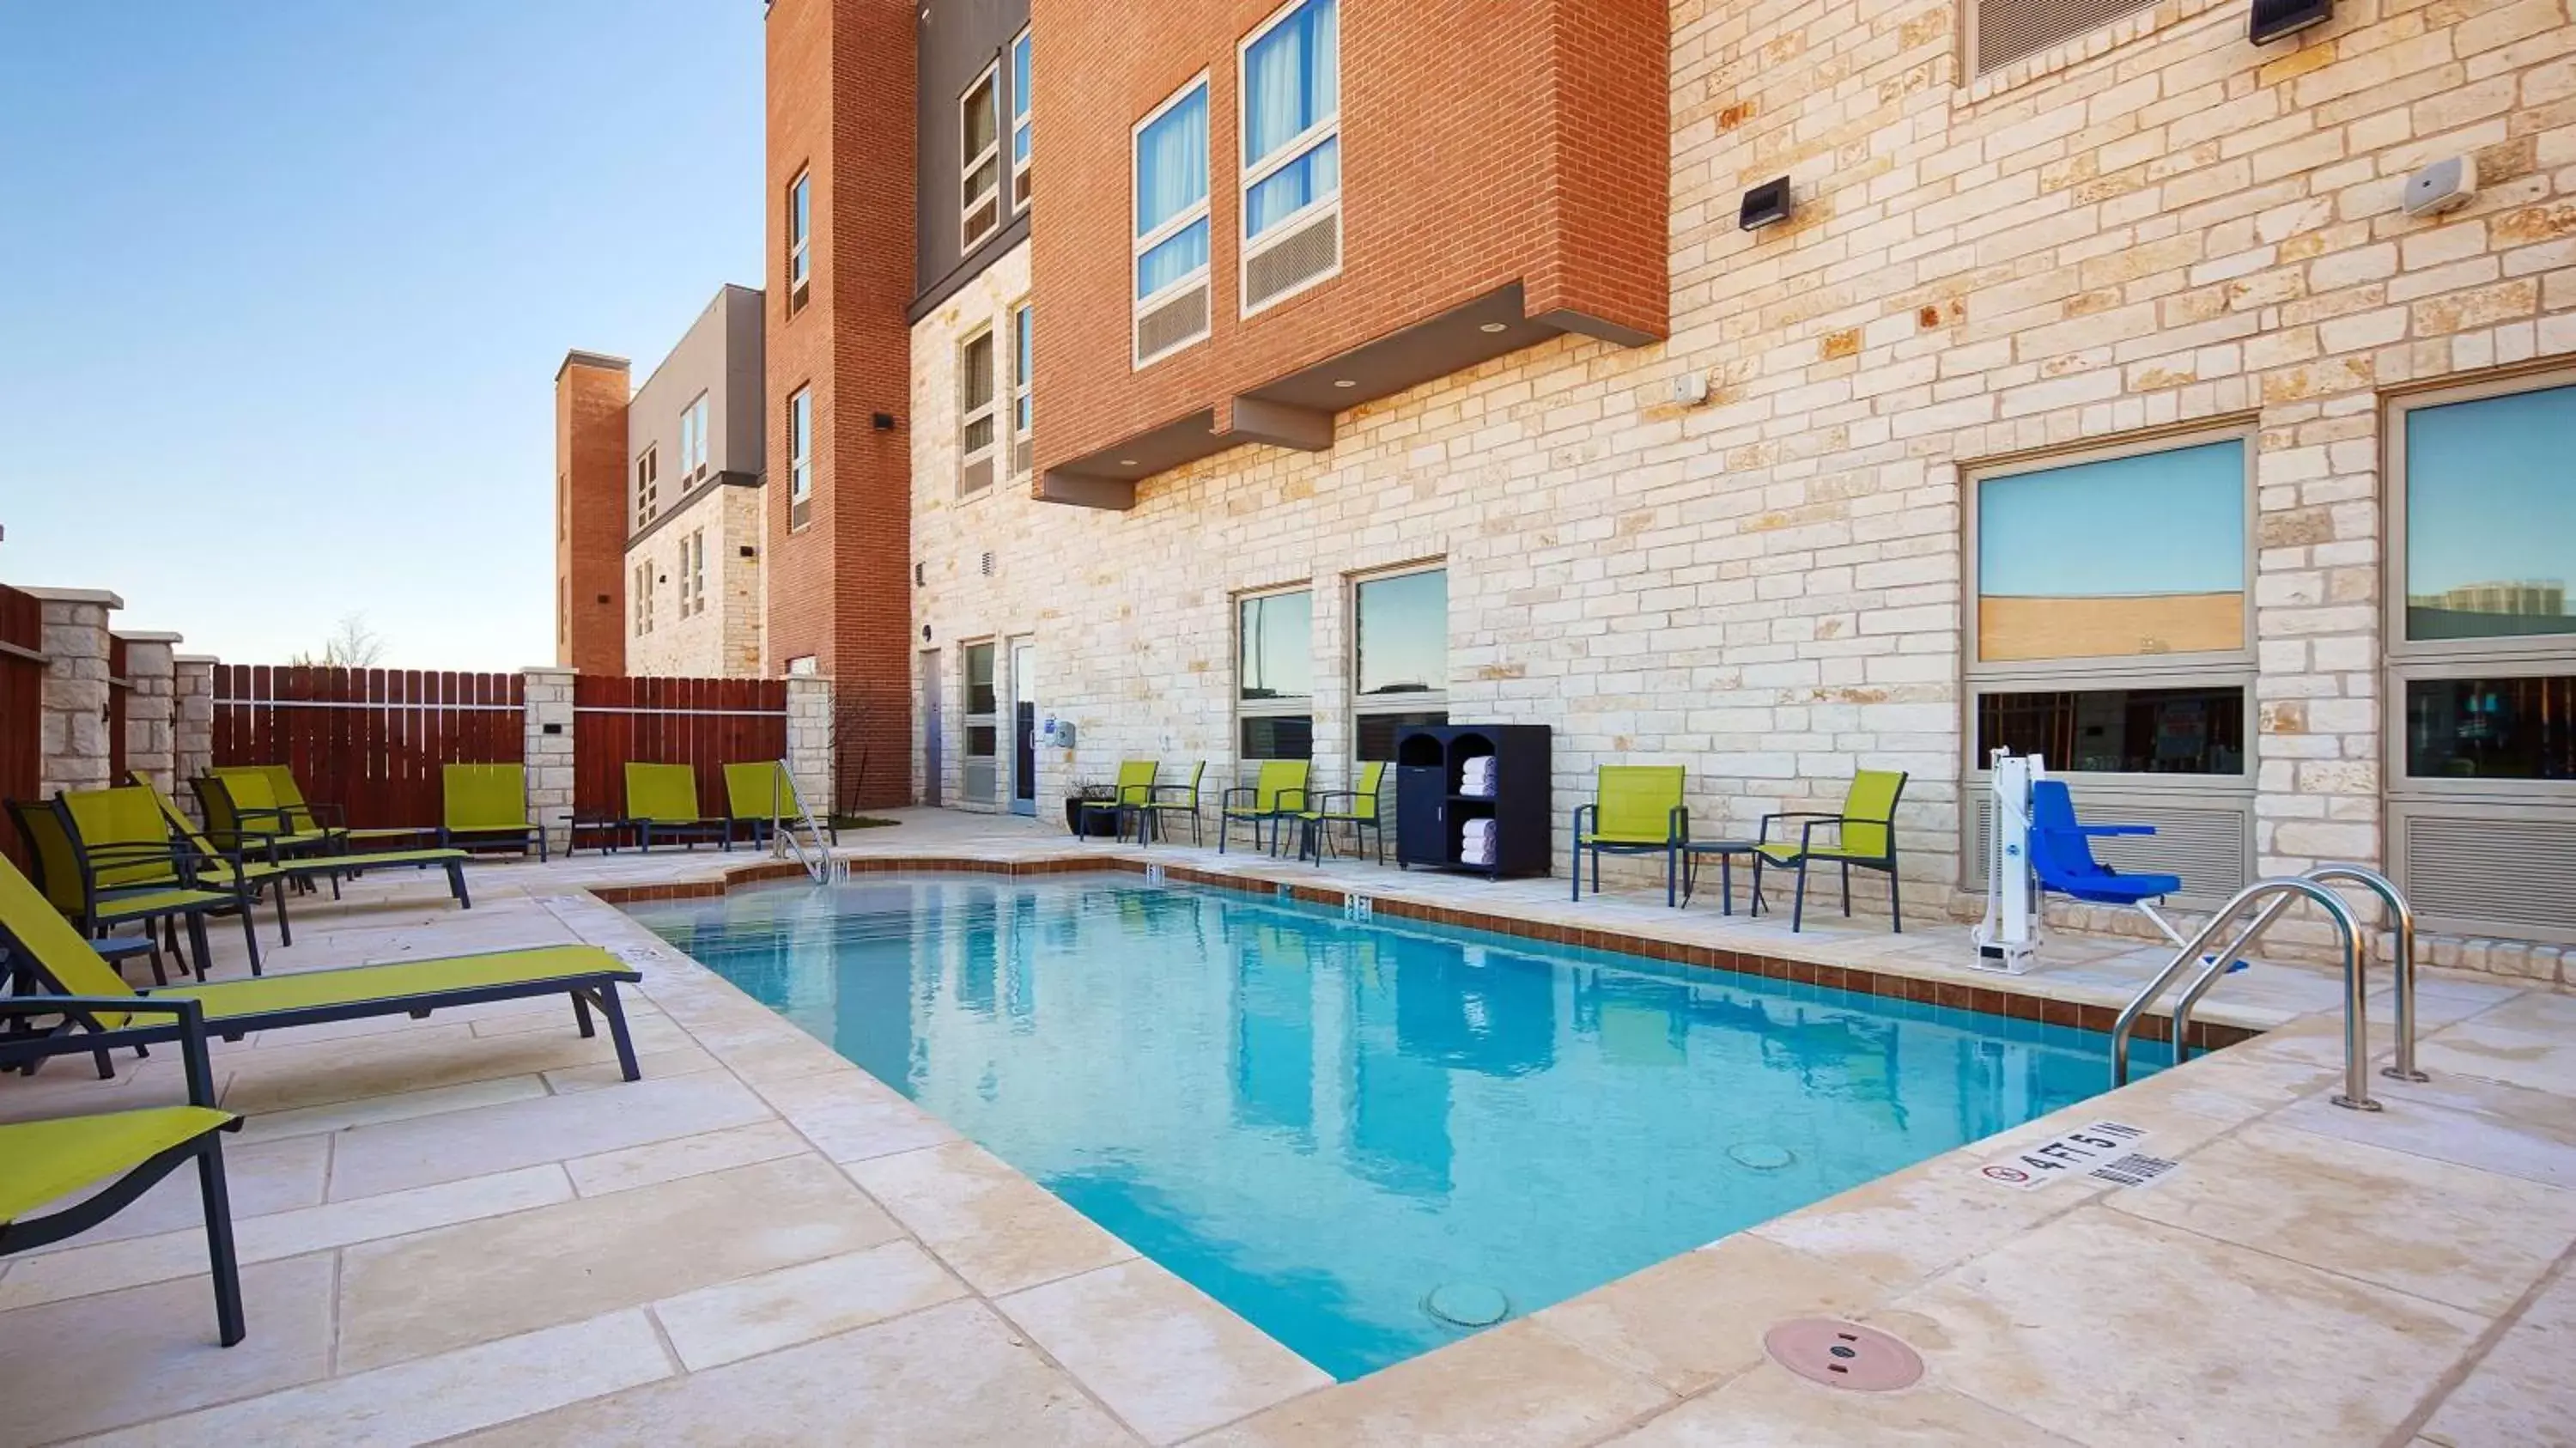 On site, Swimming Pool in Best Western Plus Pflugerville Inn & Suites